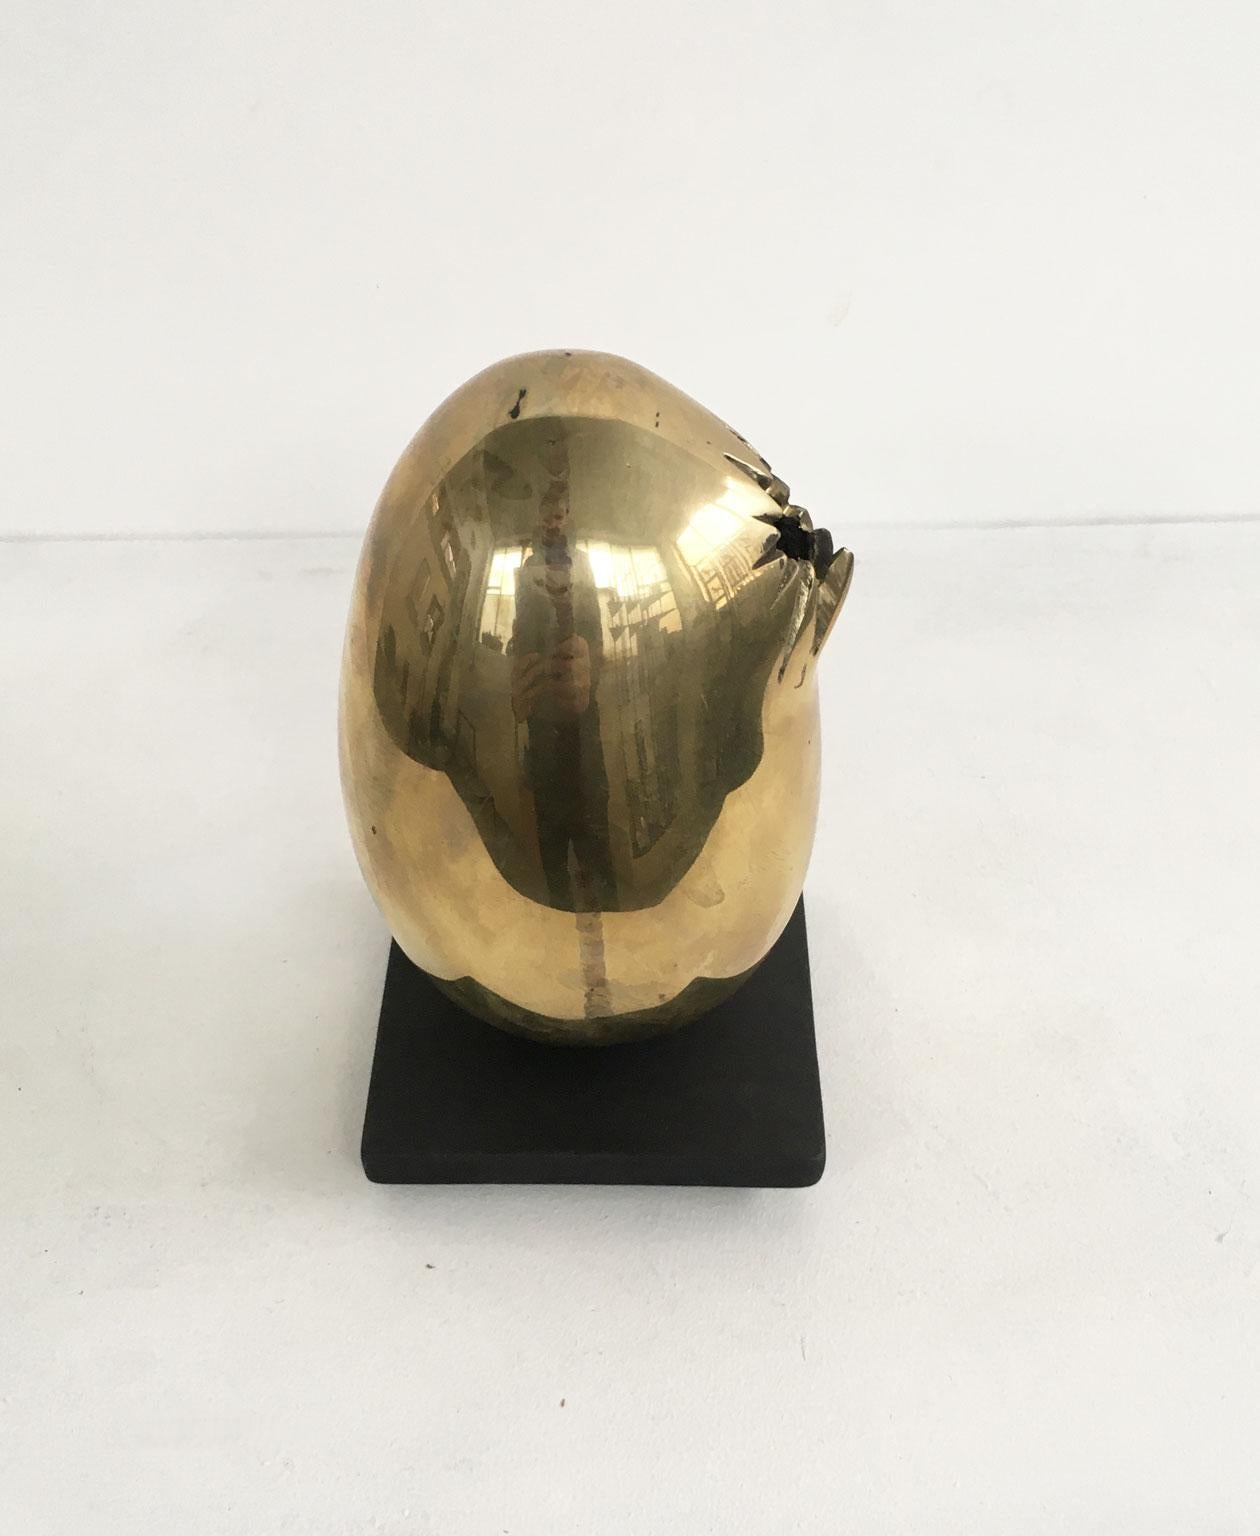 1978 Italy Bronze Abstract Sculpture by Fanna Roncoroni Forma Ovale Oval Shape For Sale 5